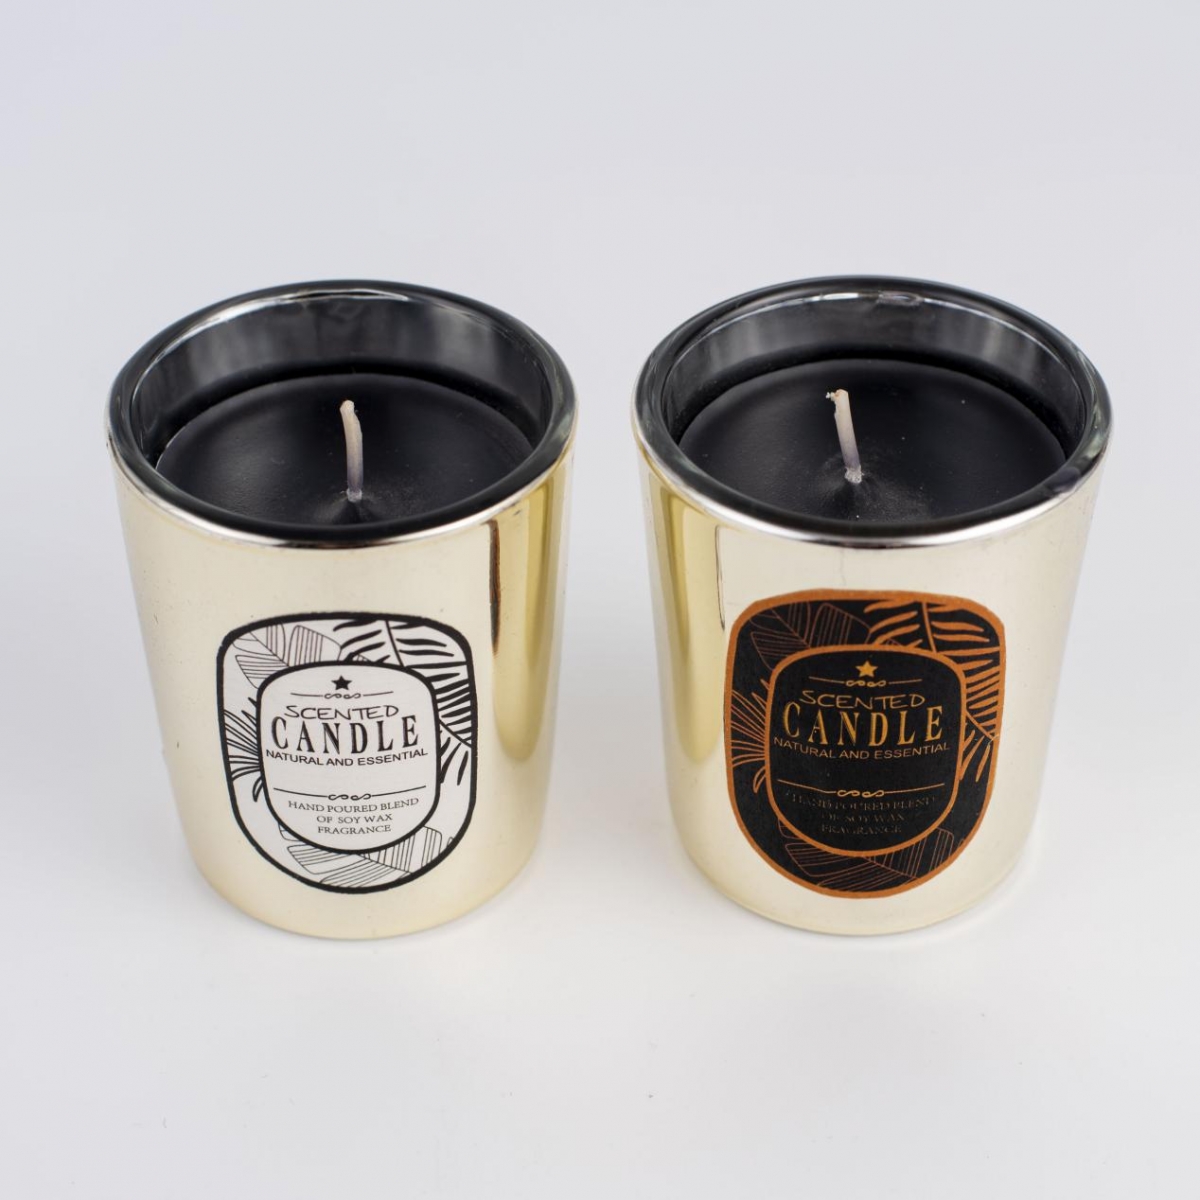 Black Scented Candles -Best Soy Wax ,Small Candles ,Private Label ,China Factory ,Price-HOWCANDLE-Candles,Scented Candles,Aromatherapy Candles,Soy Candles,Vegan Candles,Jar Candles,Pillar Candles,Candle Gift Sets,Essential Oils,Reed Diffuser,Candle Holder,